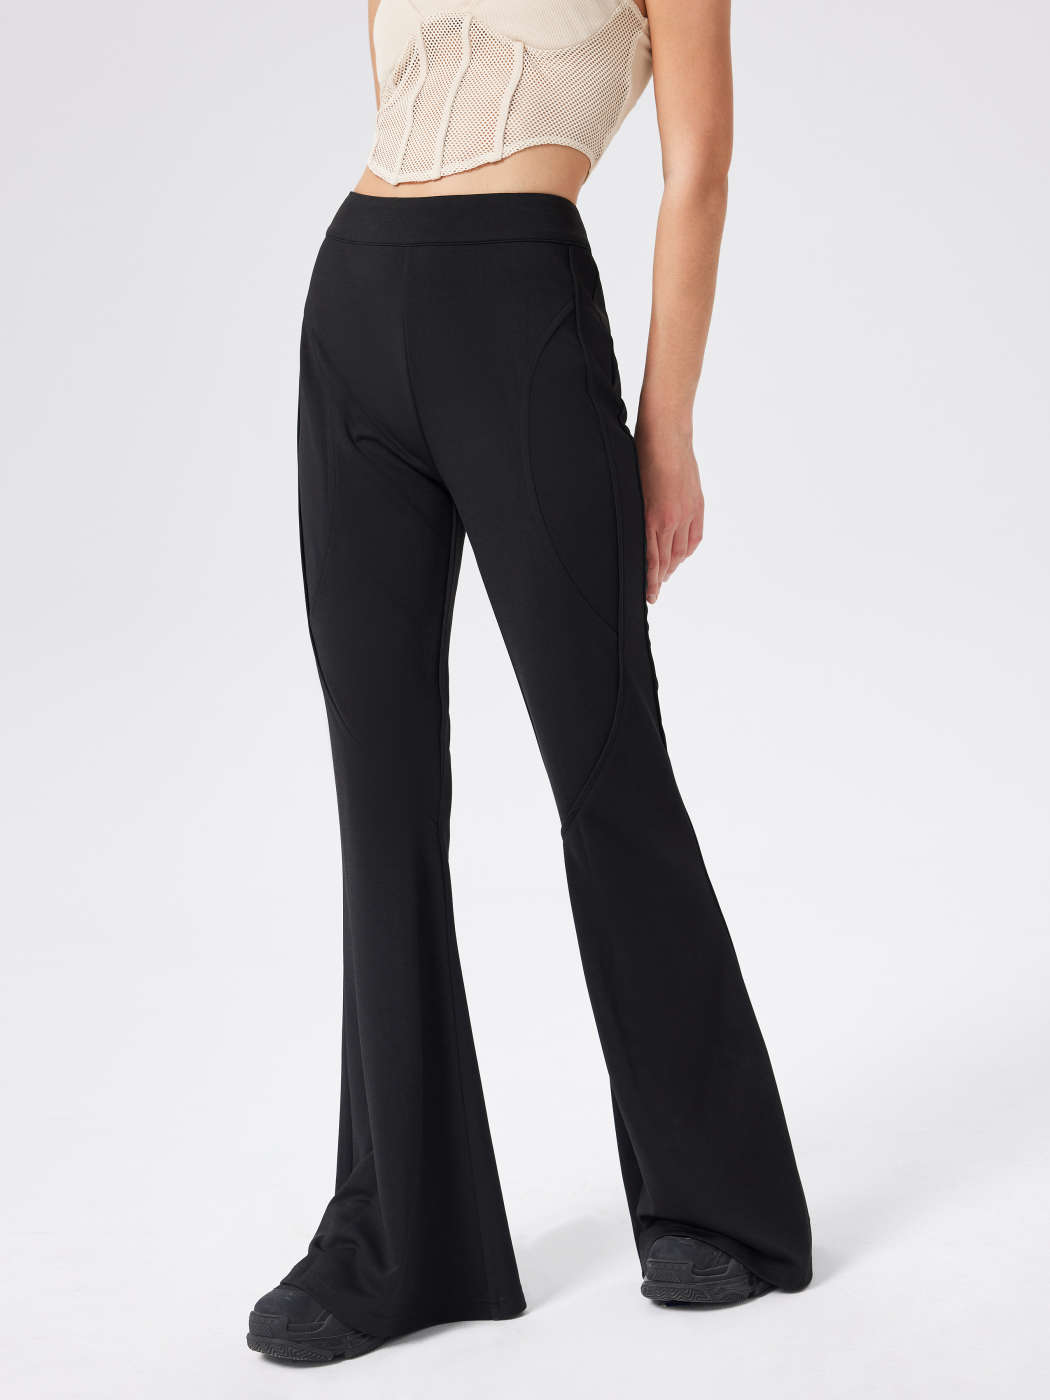 The Everyday Essential Black Flare Trousers